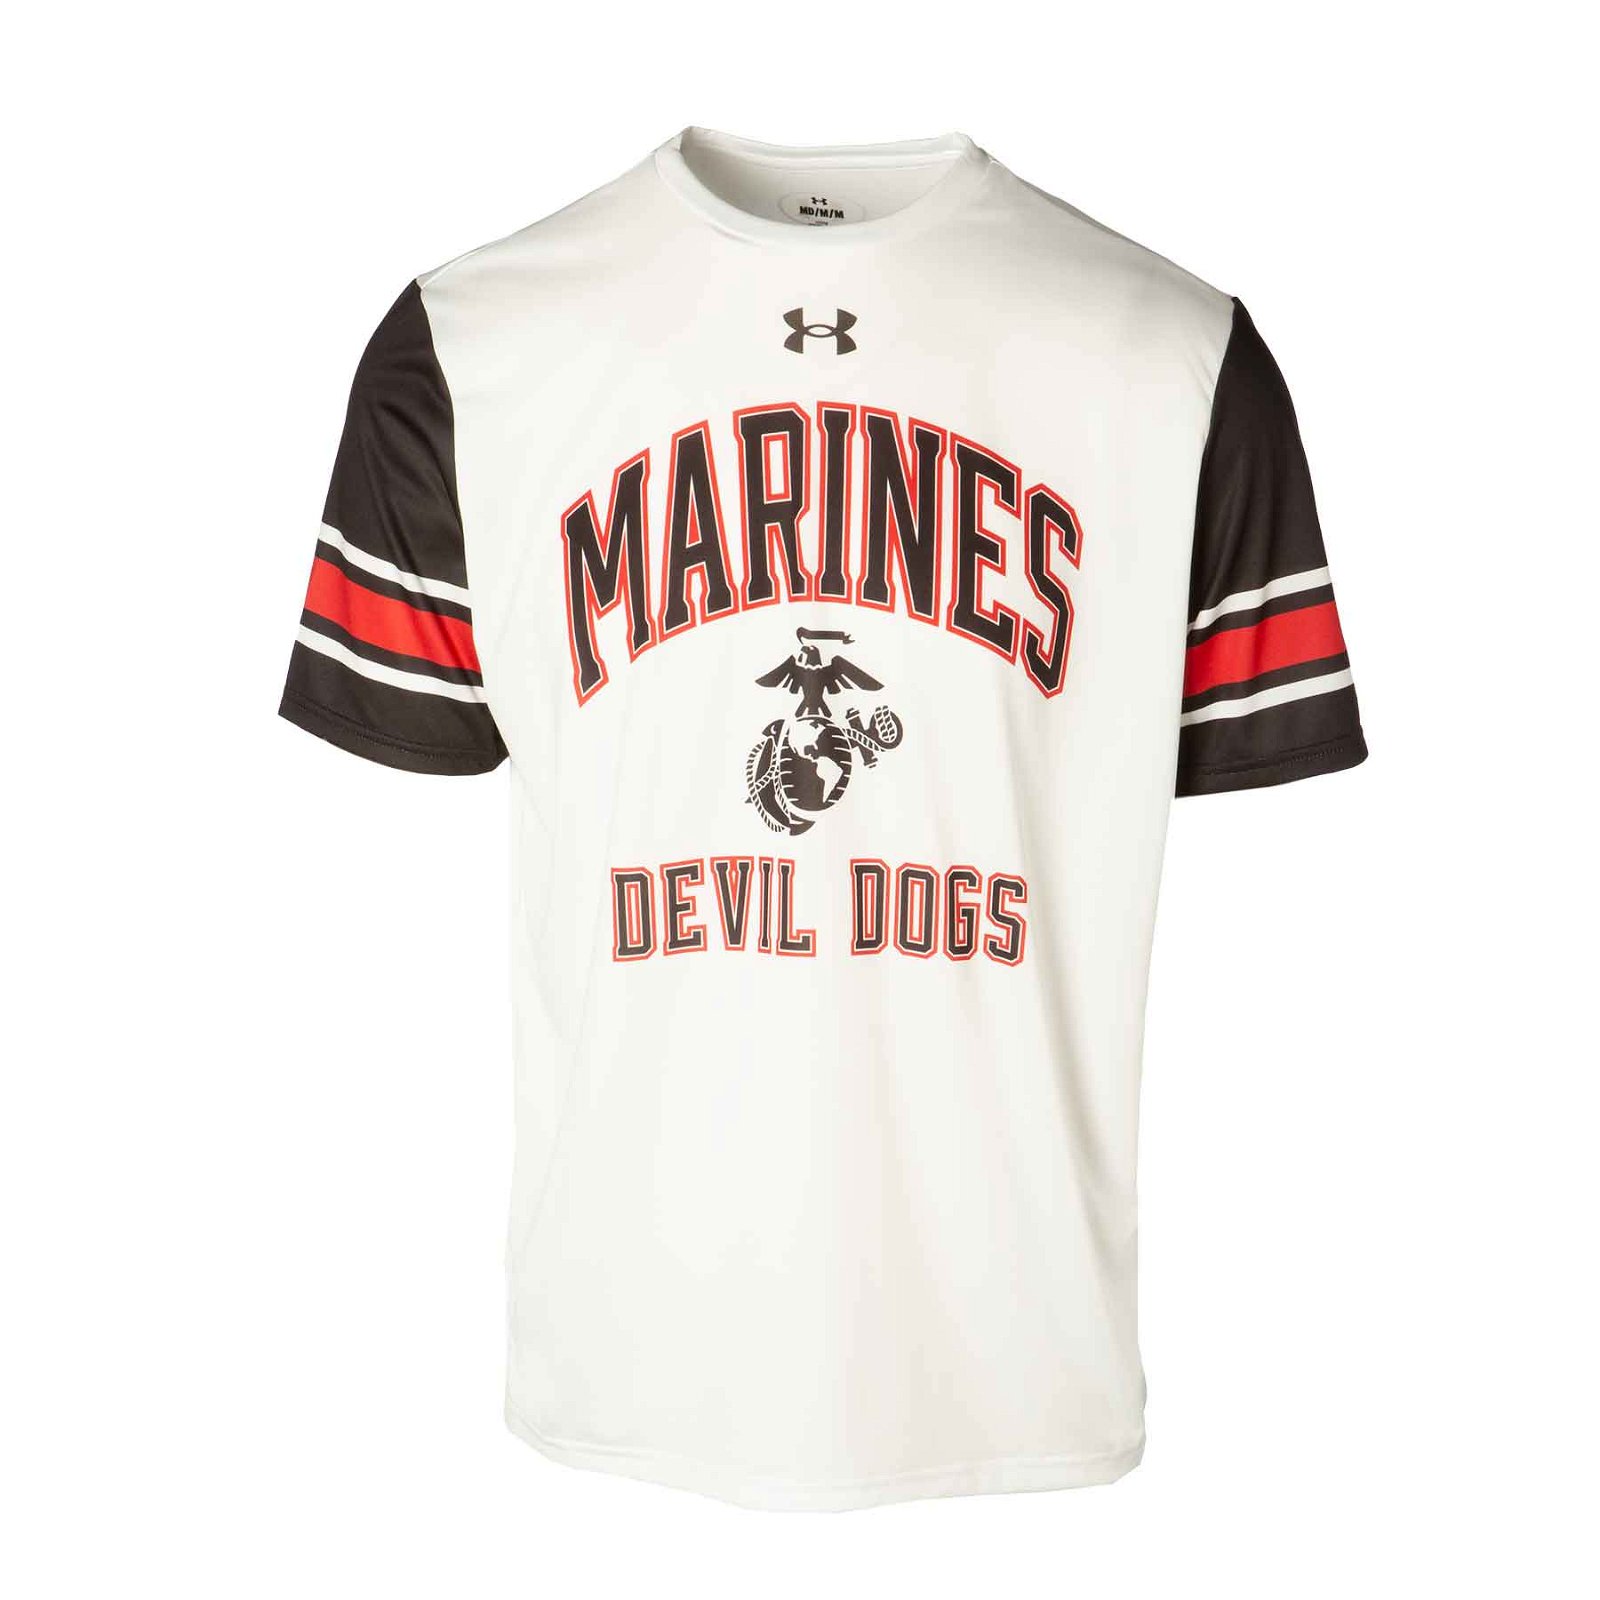 Image of Under Armour Marines Devil Dogs Short Sleeve Tech Tee